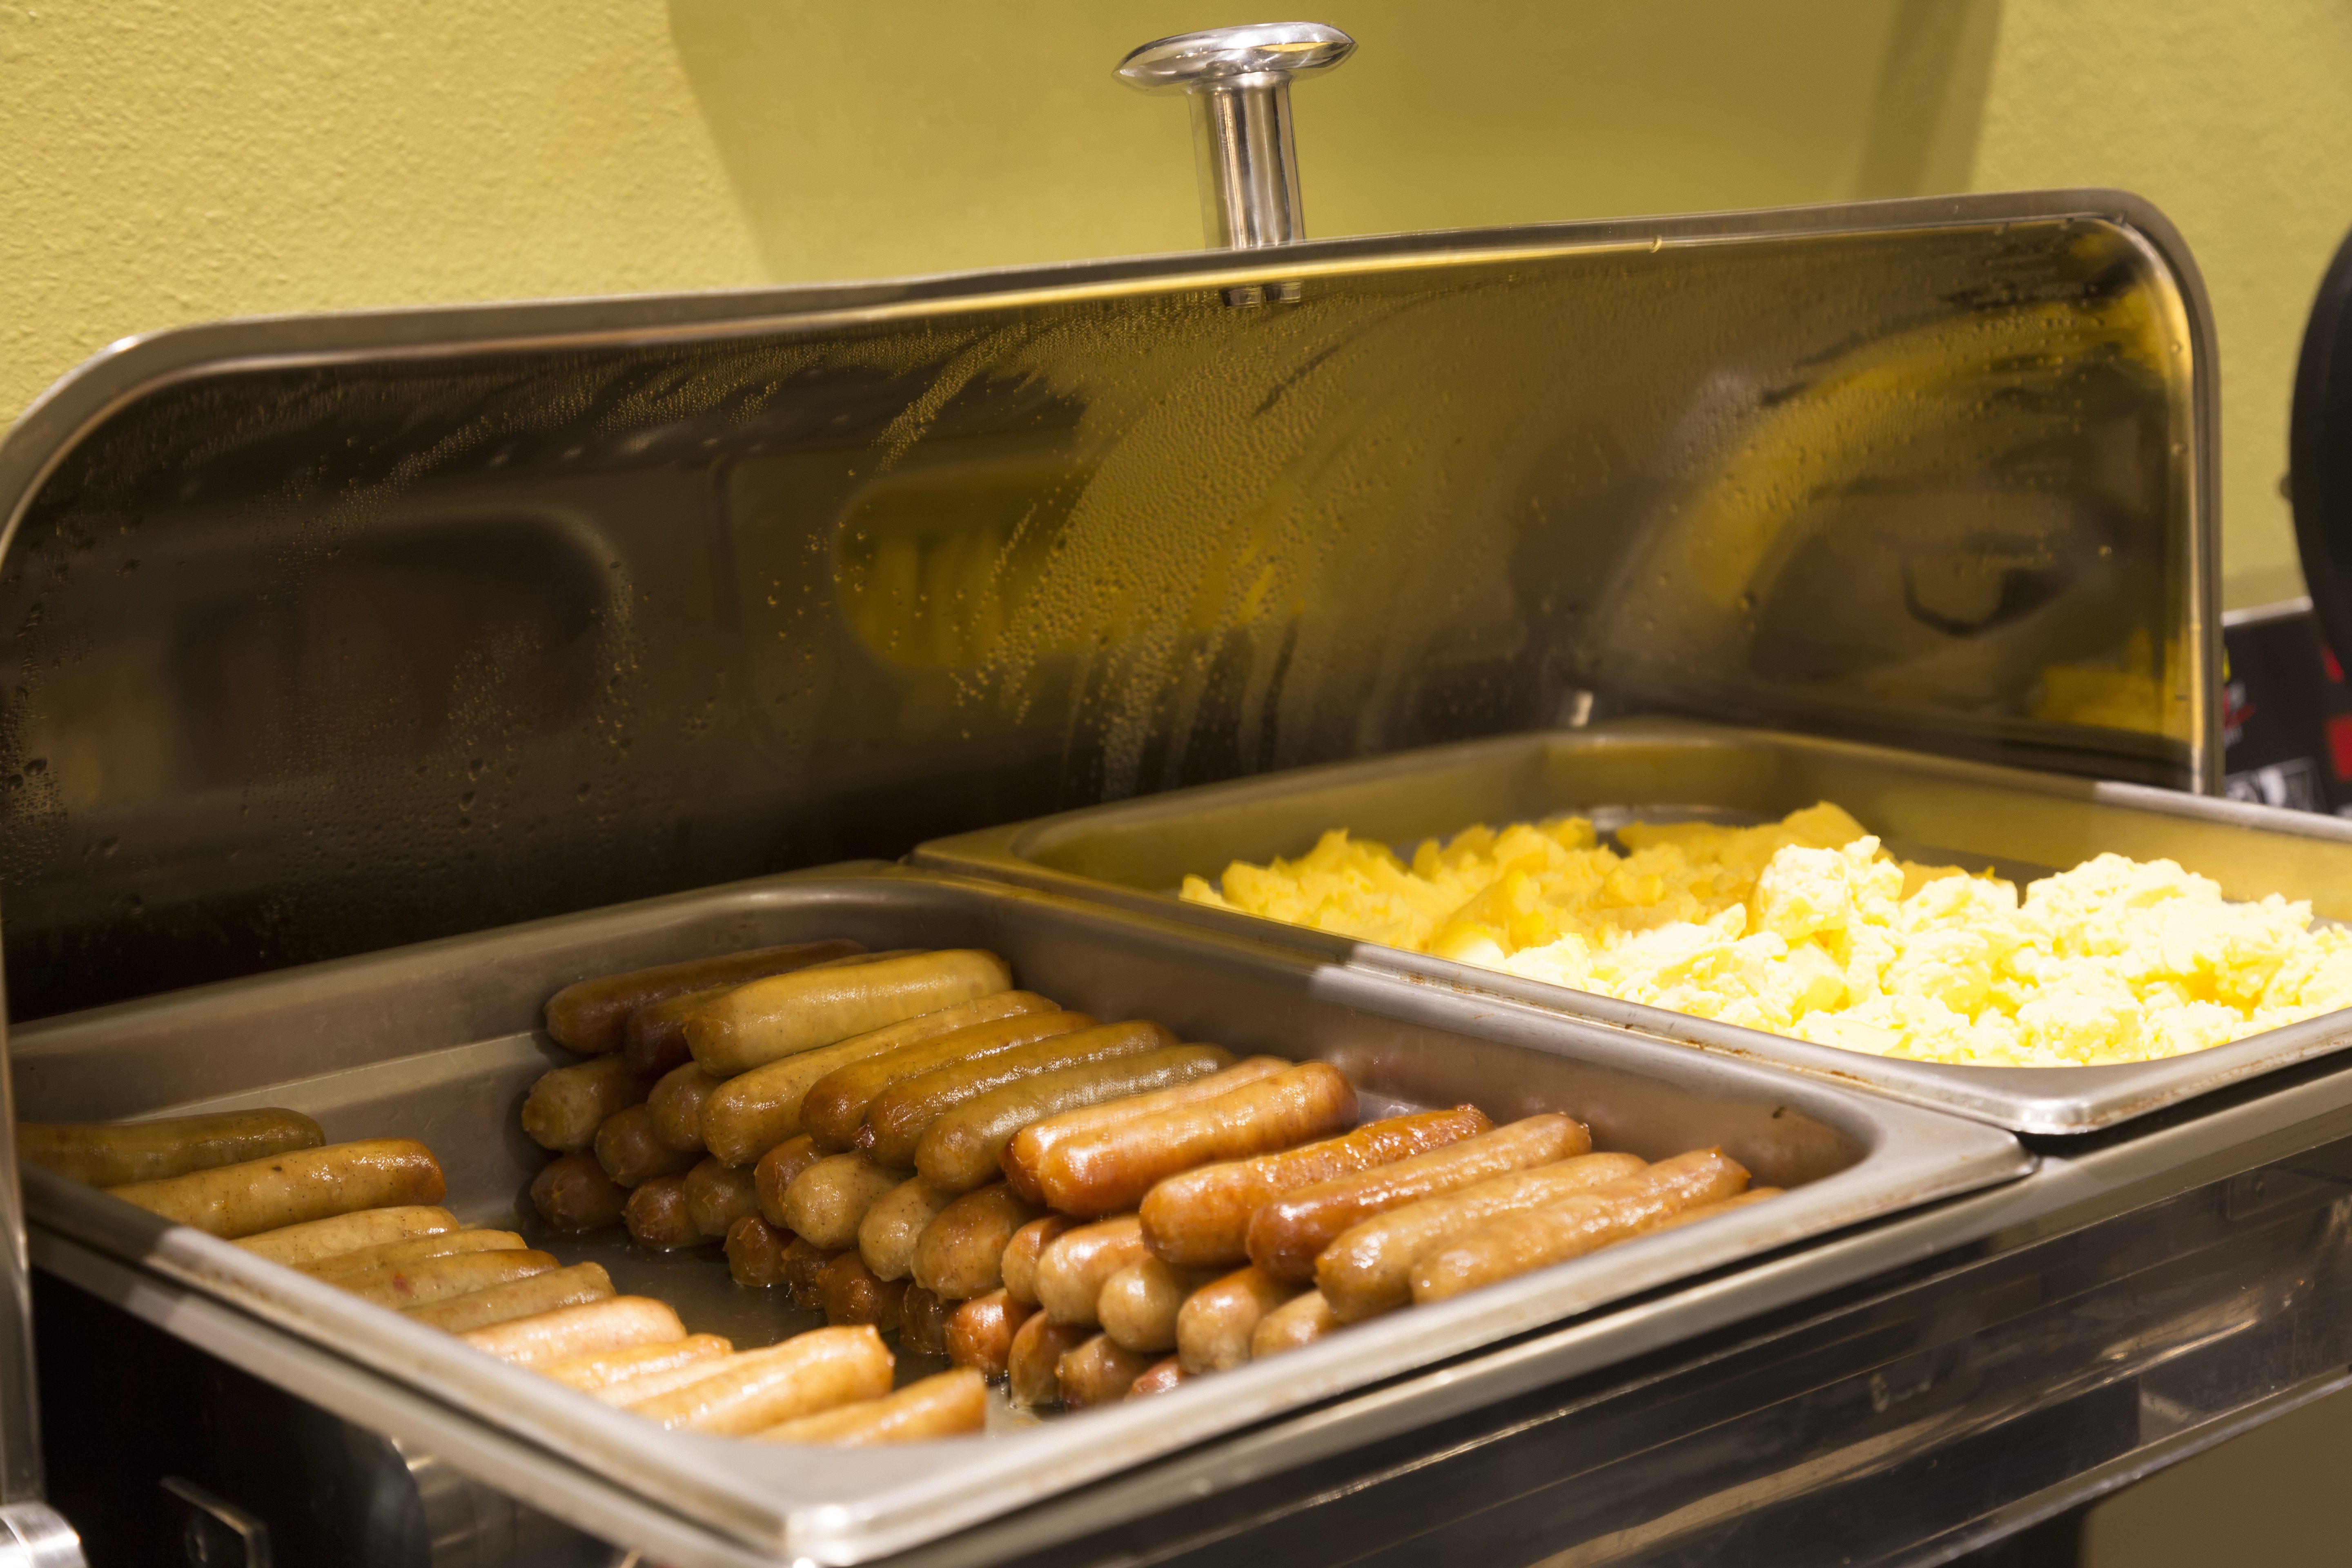 So many options to choose from here on the breakfast buffet.